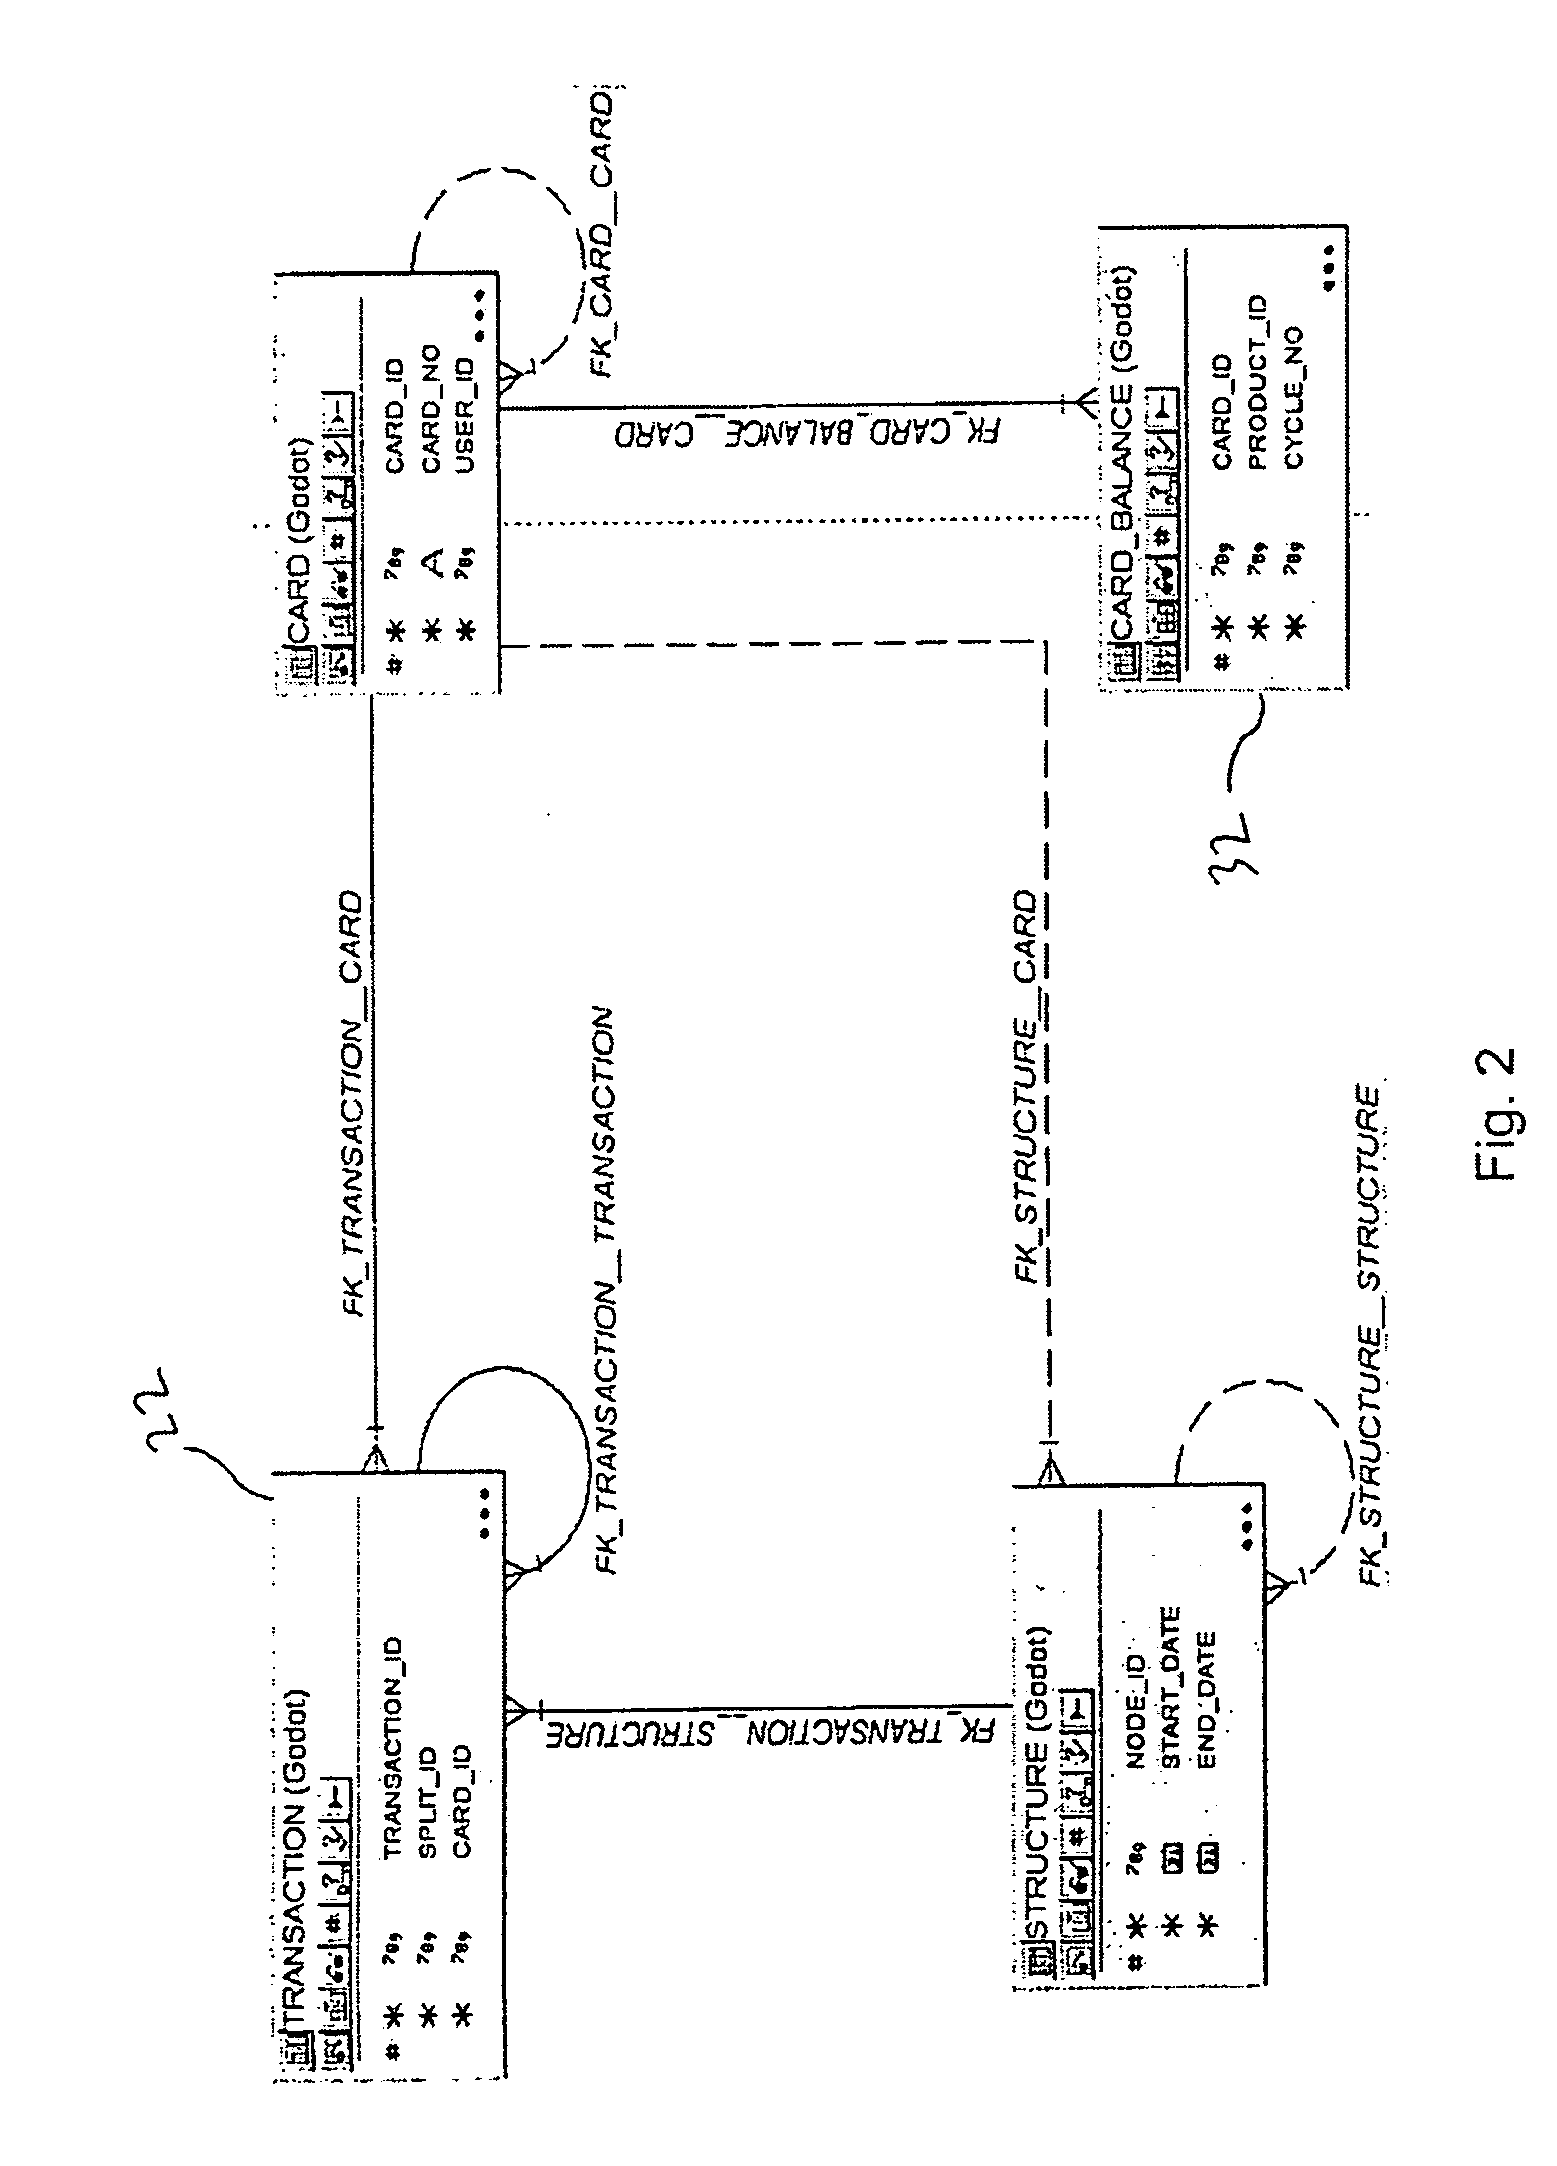 System and method for exporting formatted transactional data from a database system